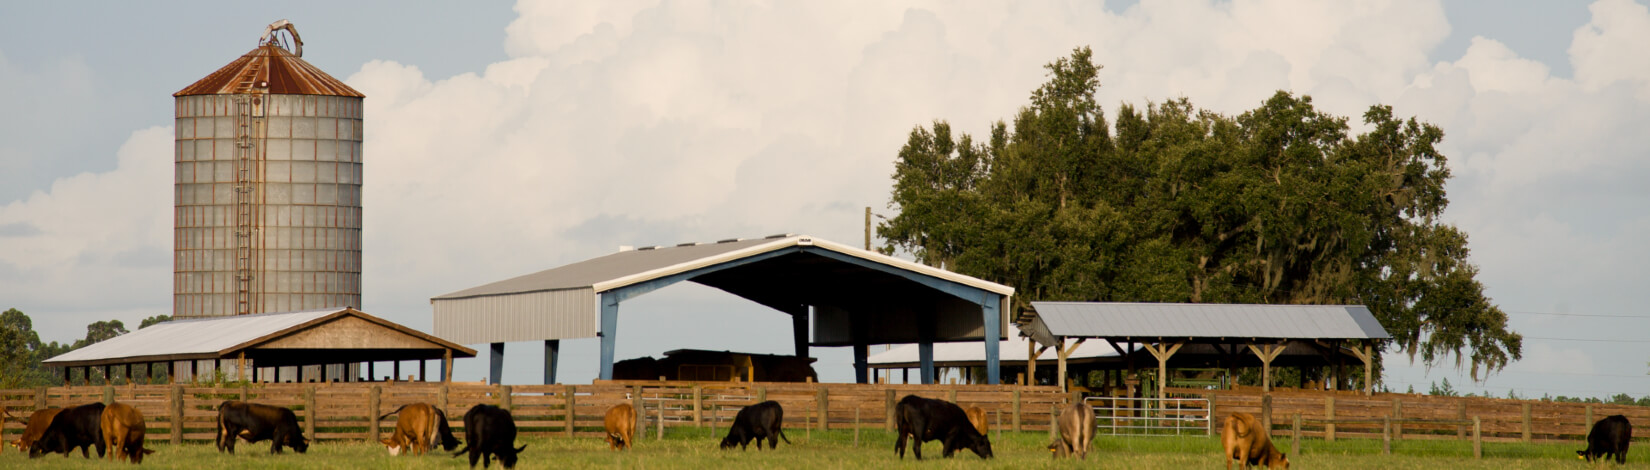 Beef cattle grazing in front of a grain silo at the Range Cattle REC